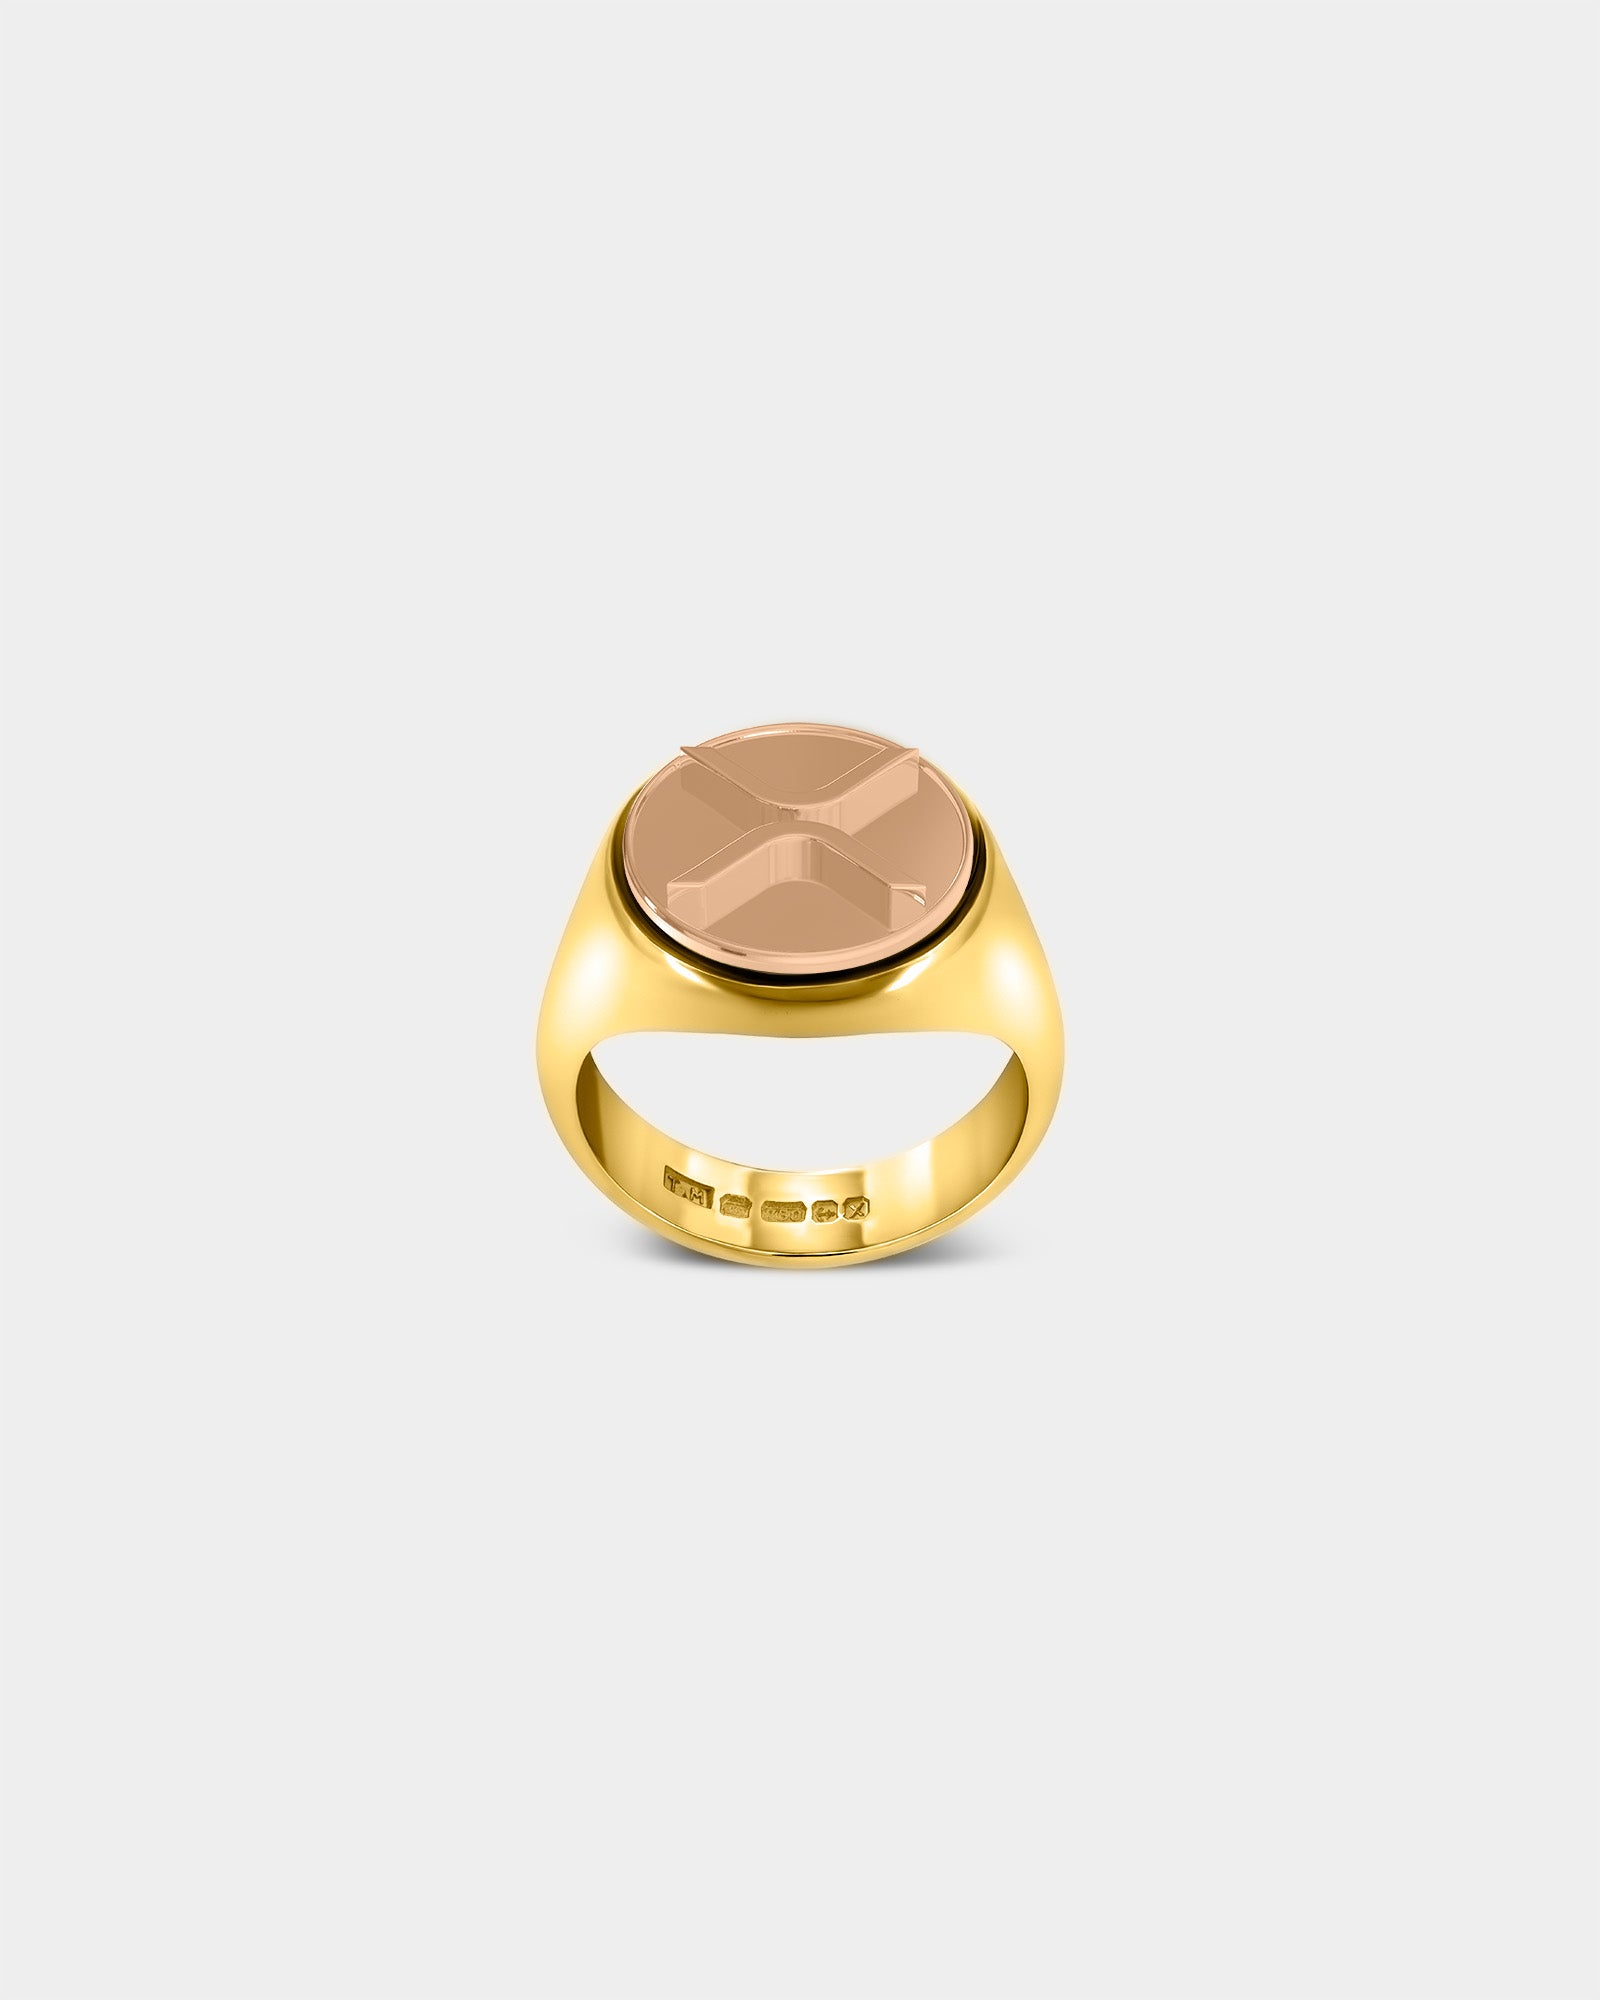 Large Ripple XRP Crypto Ring in 9k Yellow Gold / 9k Rose Gold by Wilson Grant